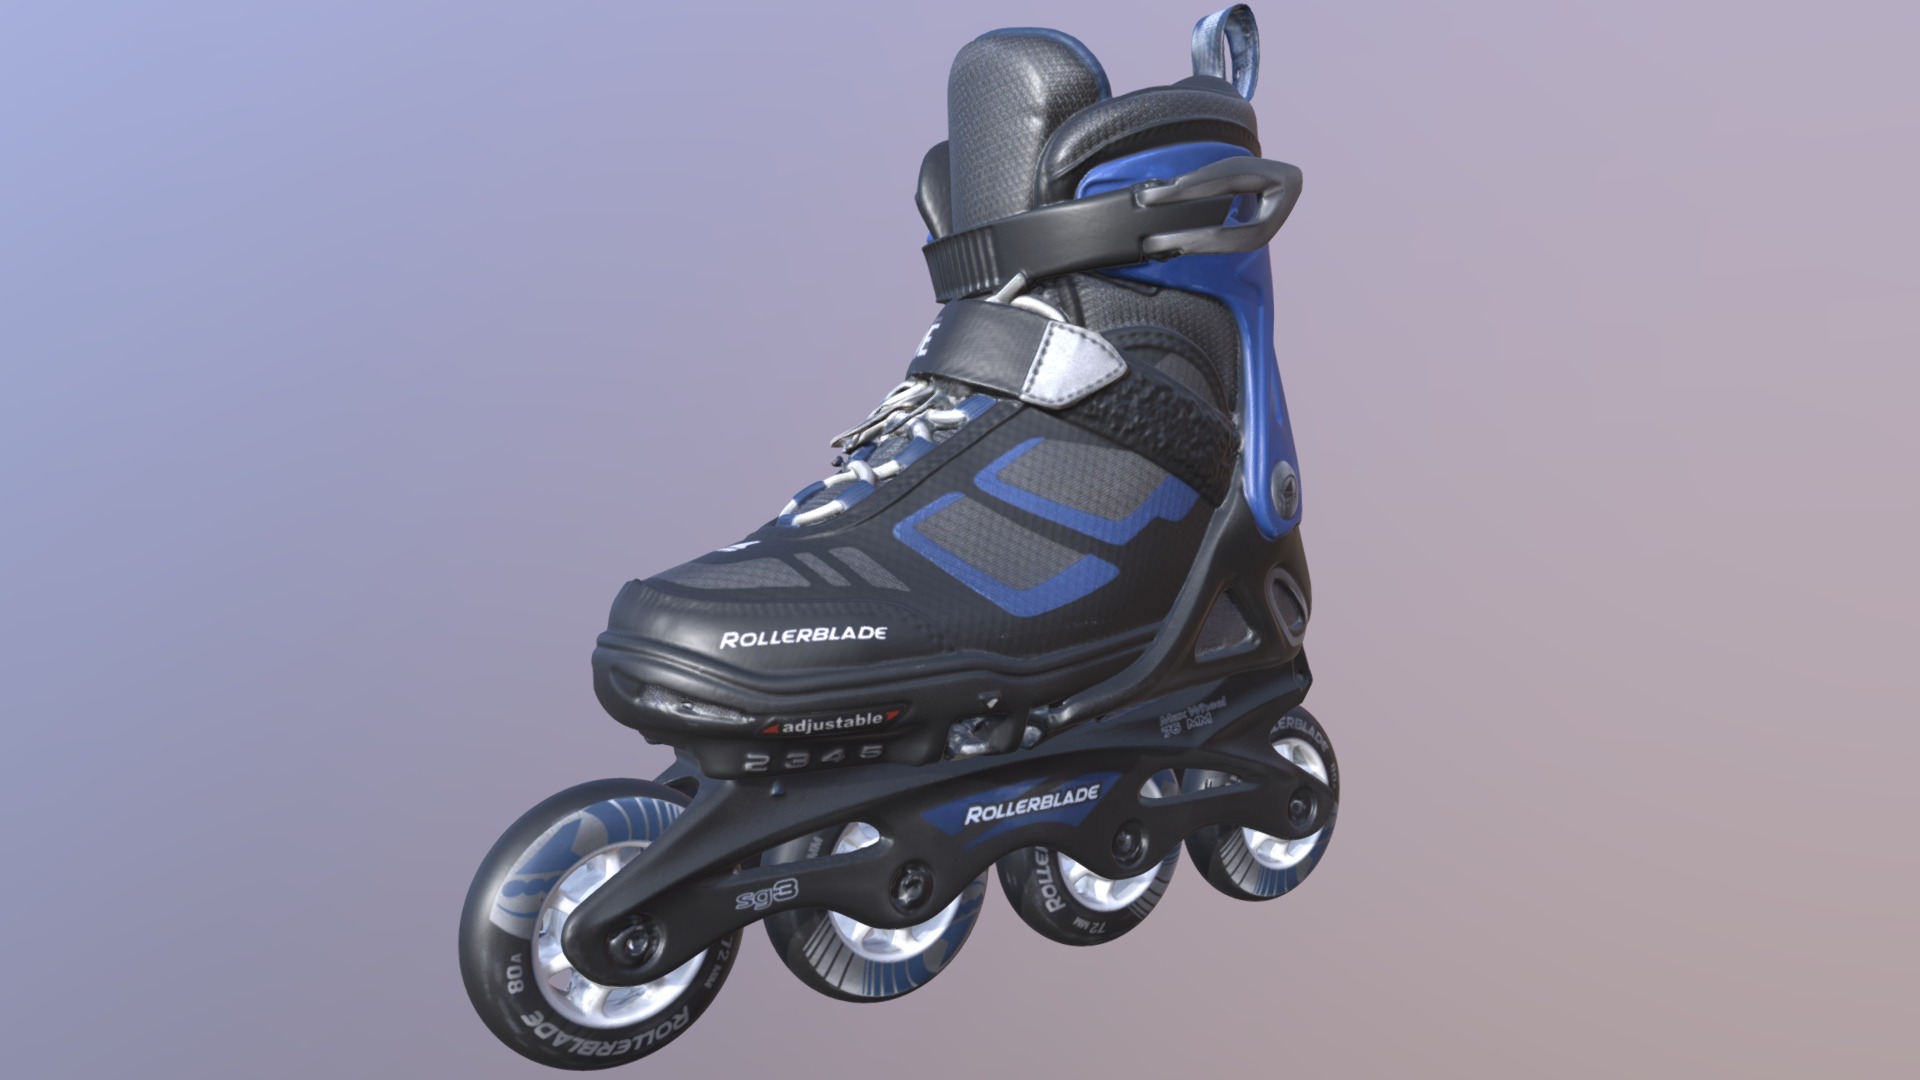 3D model Rollerblade Spitfire - This is a 3D model of the Rollerblade Spitfire. The 3D model is about a black and silver toy motorcycle.